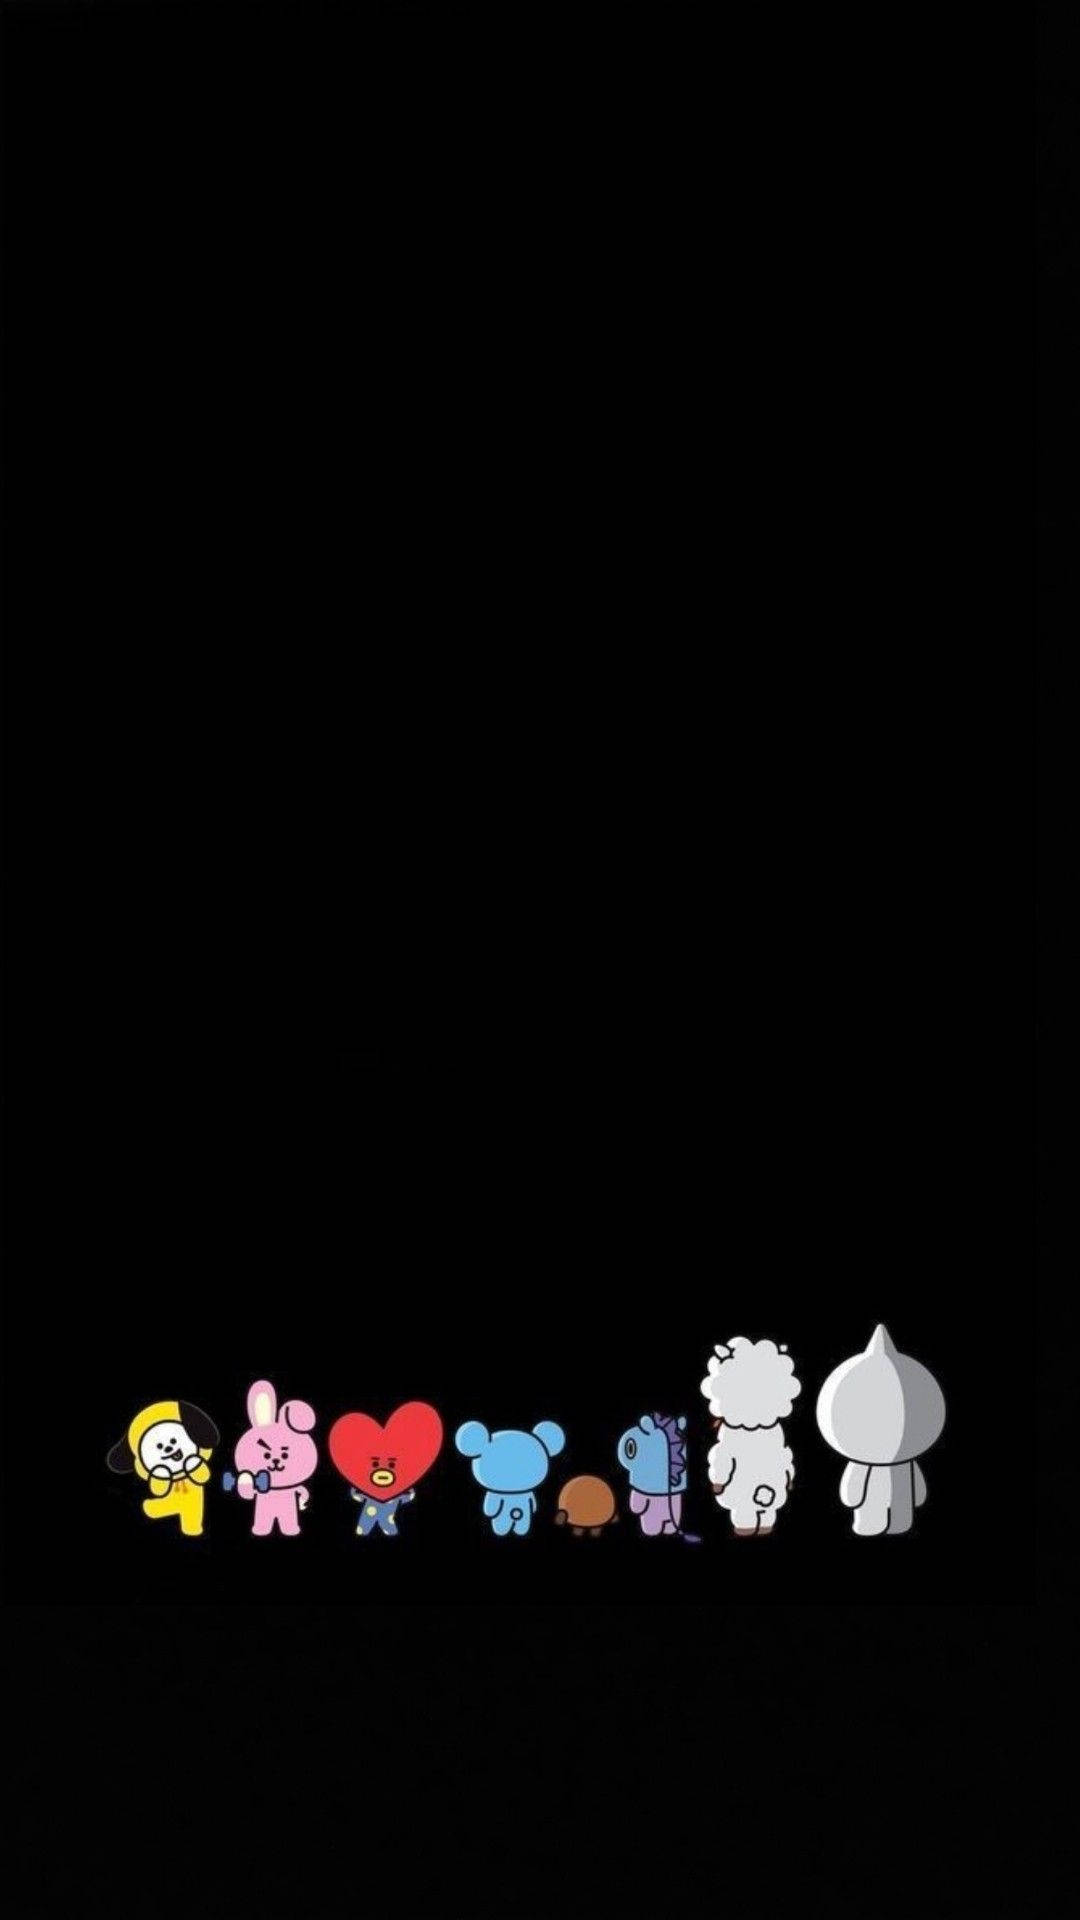 BT21 Wallpaper  BT21 Stickers  Cute Wallpaper for iOS and Android  BT21  Aesthetic  Cute cartoon wallpapers Cute wallpapers Cartoon wallpaper